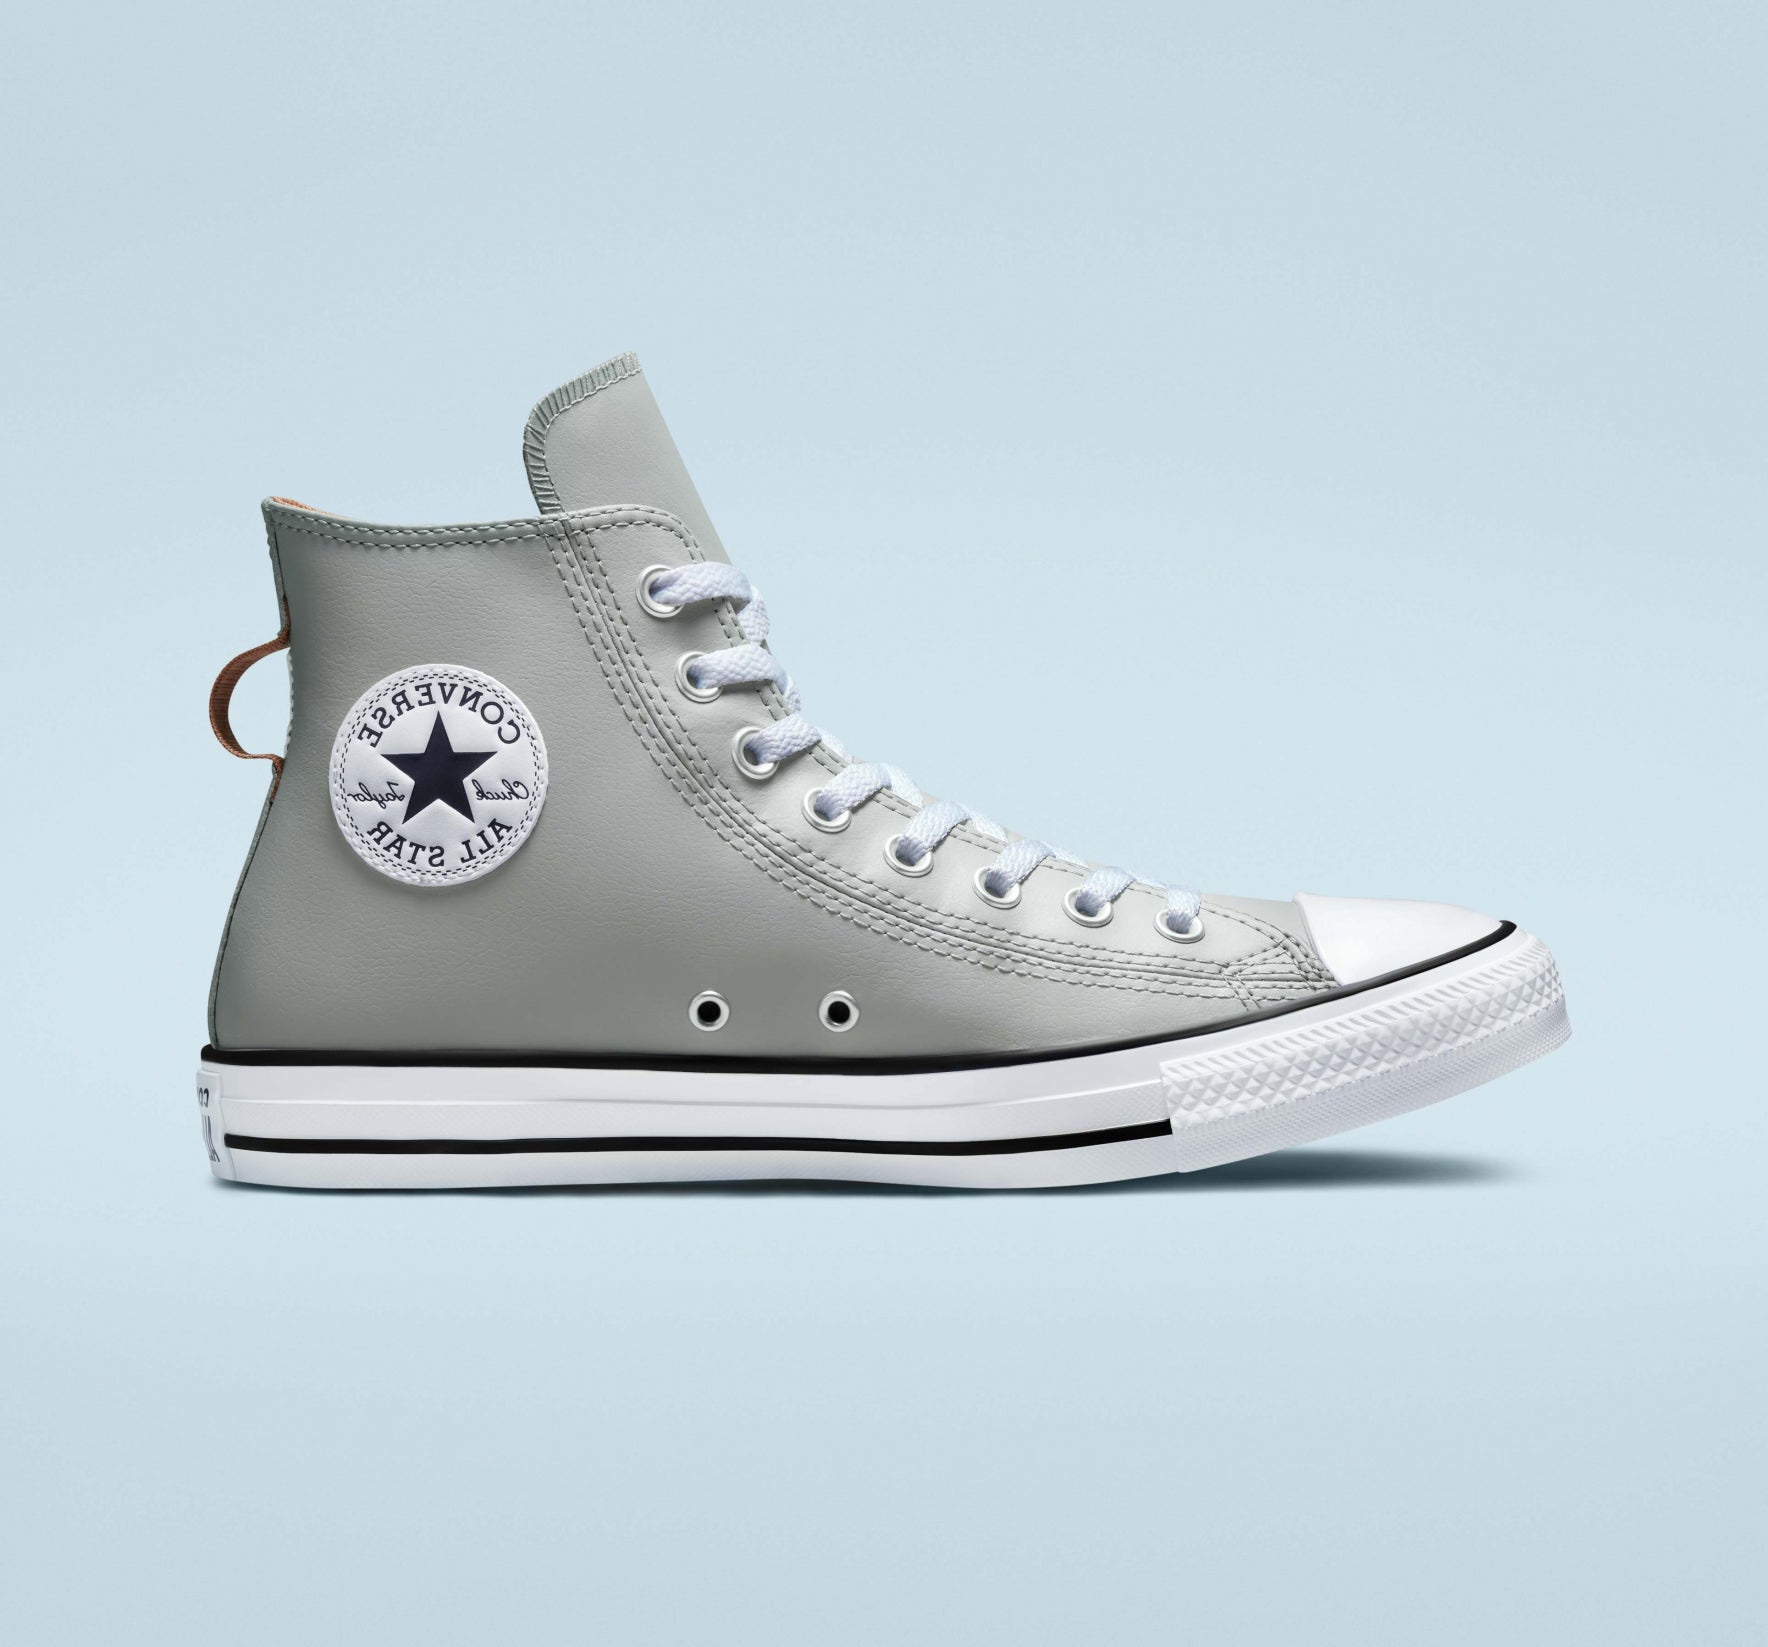 CT-L35 (Ct crafted faux leather hi sage/mineral clay/white) 52295250 CONVERSE